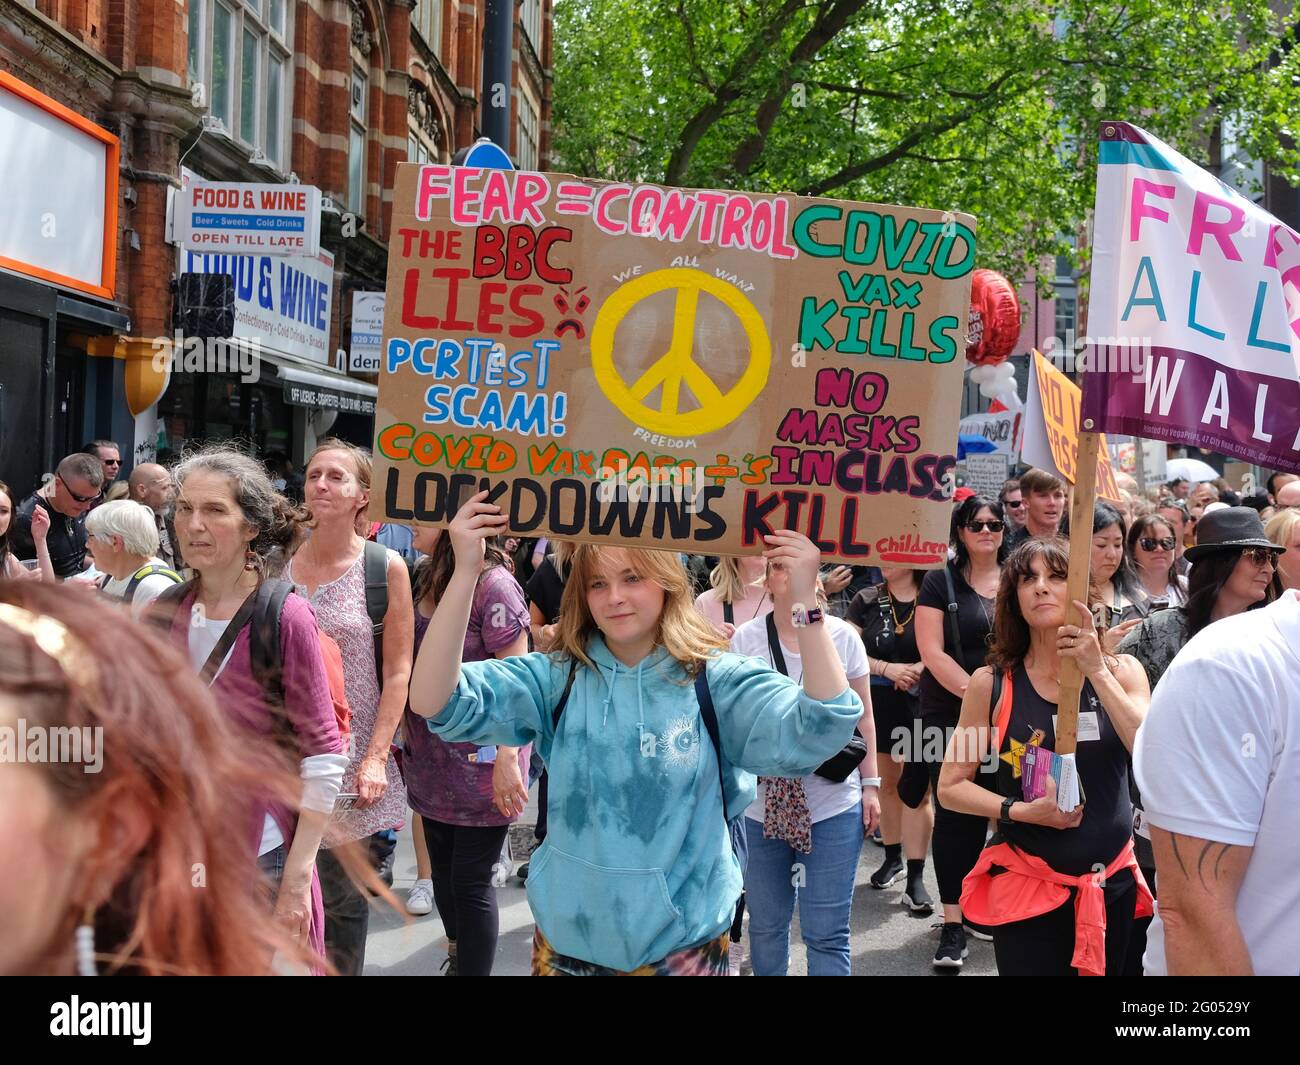 London, UK. 29/05/21.  A young person protests against government imposed Covid restrictions and perceived BBC bias. Stock Photo